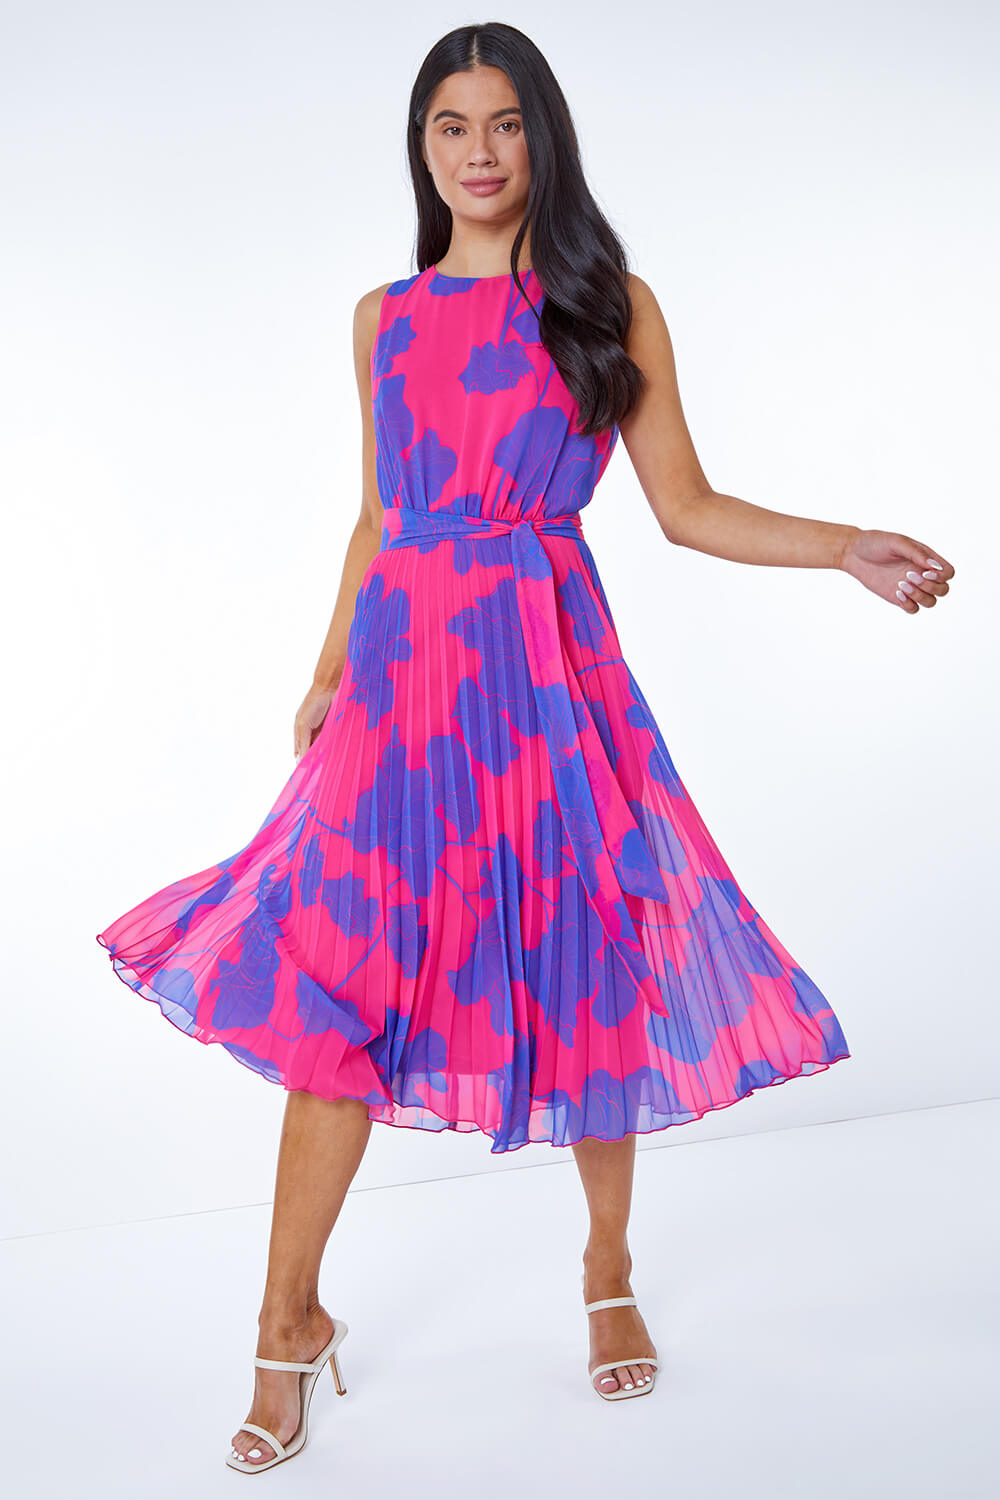 PINK Petite Linear Floral Print Pleated Dress, Image 2 of 5